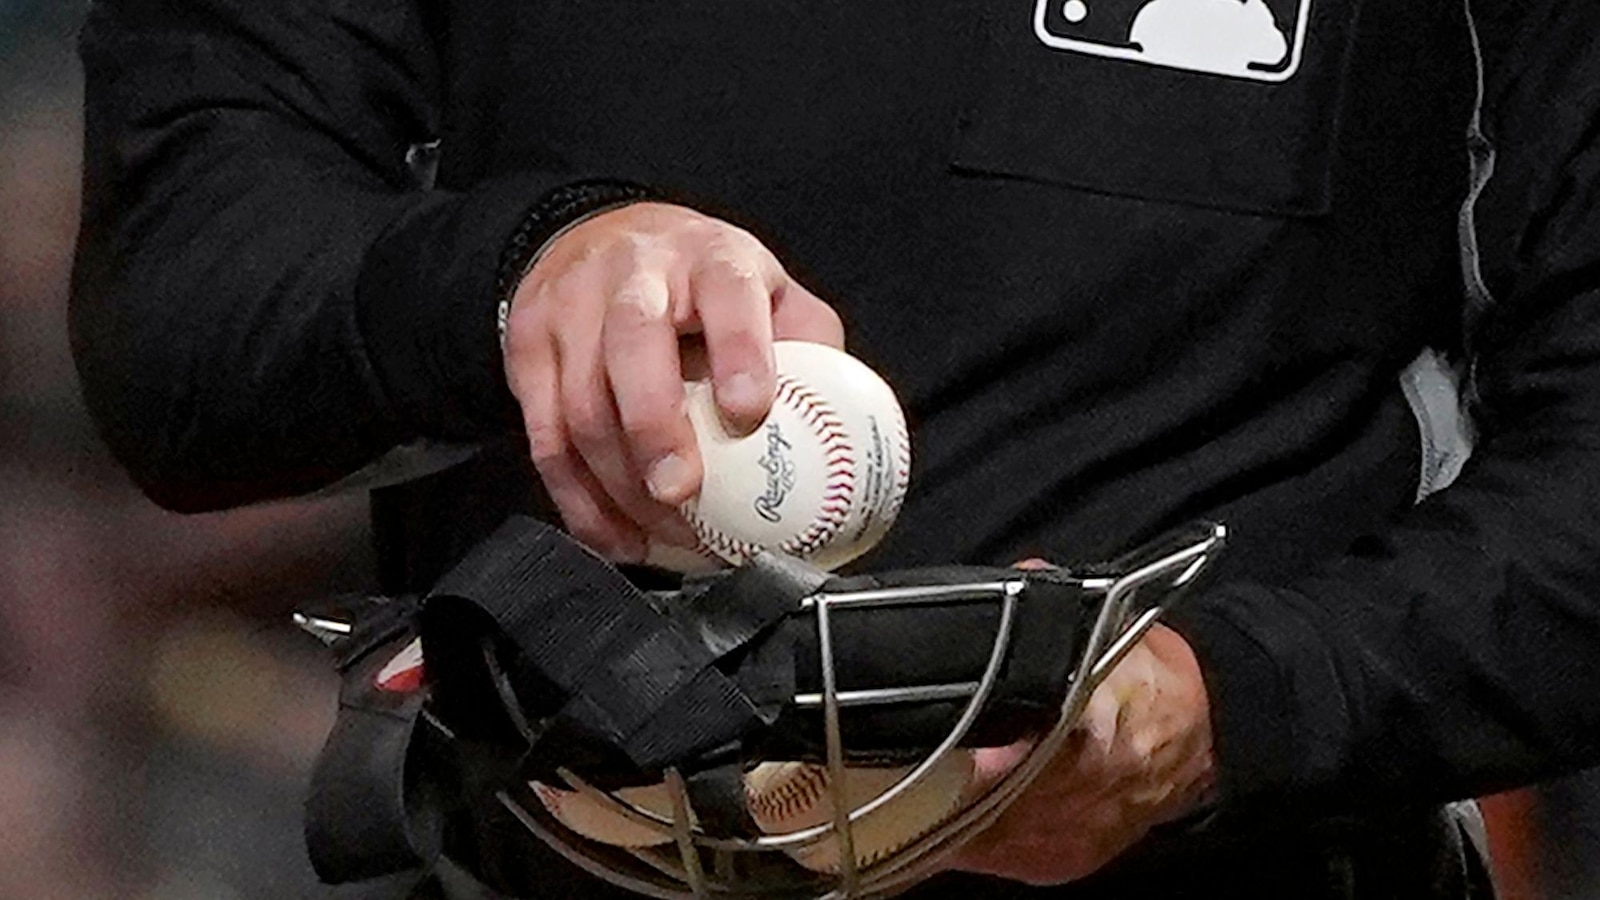 Former Umpire Sues MLB for Sexual Harassment and Discrimination